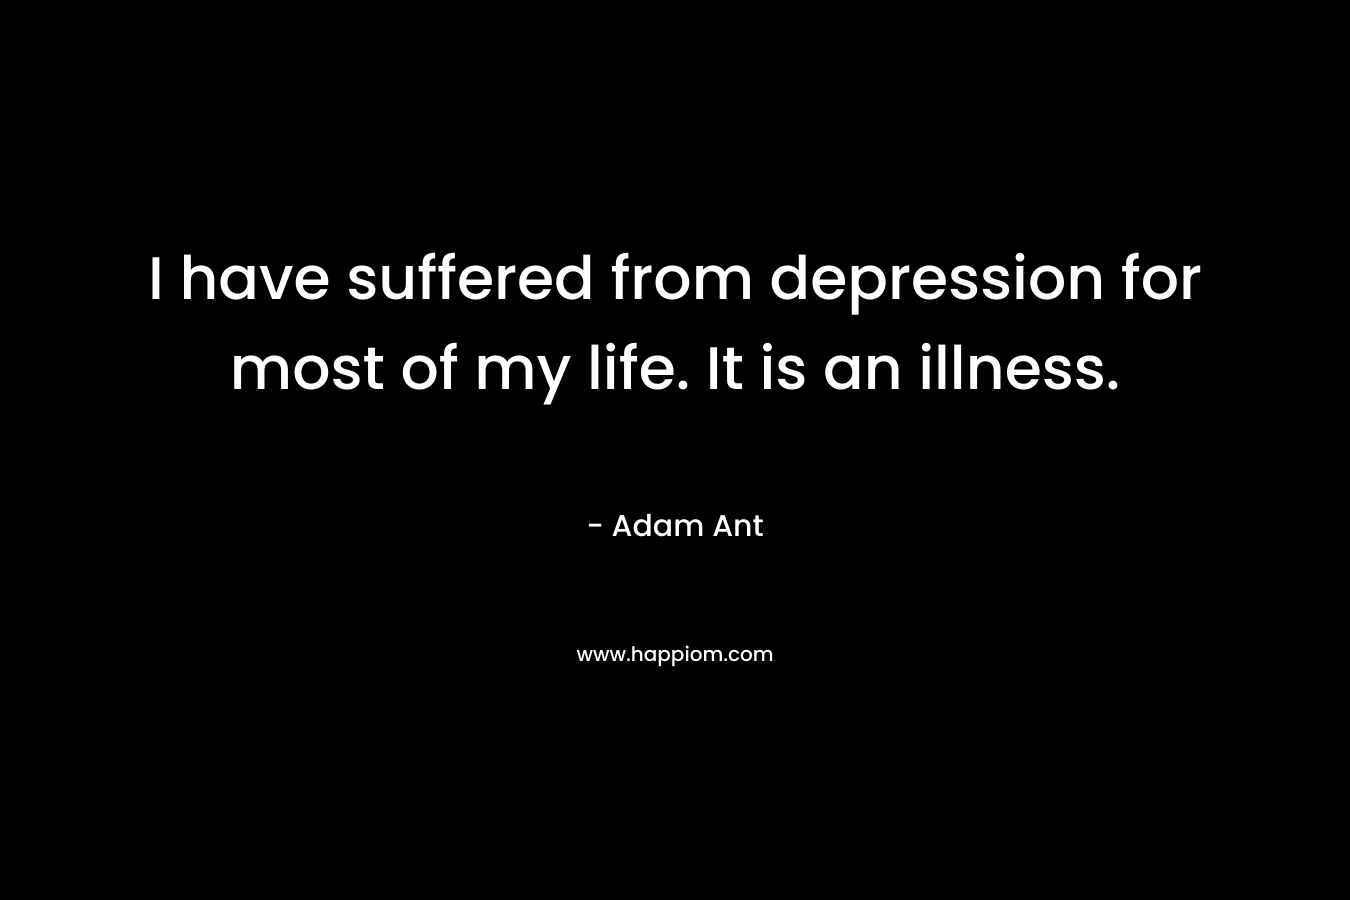 I have suffered from depression for most of my life. It is an illness. – Adam Ant